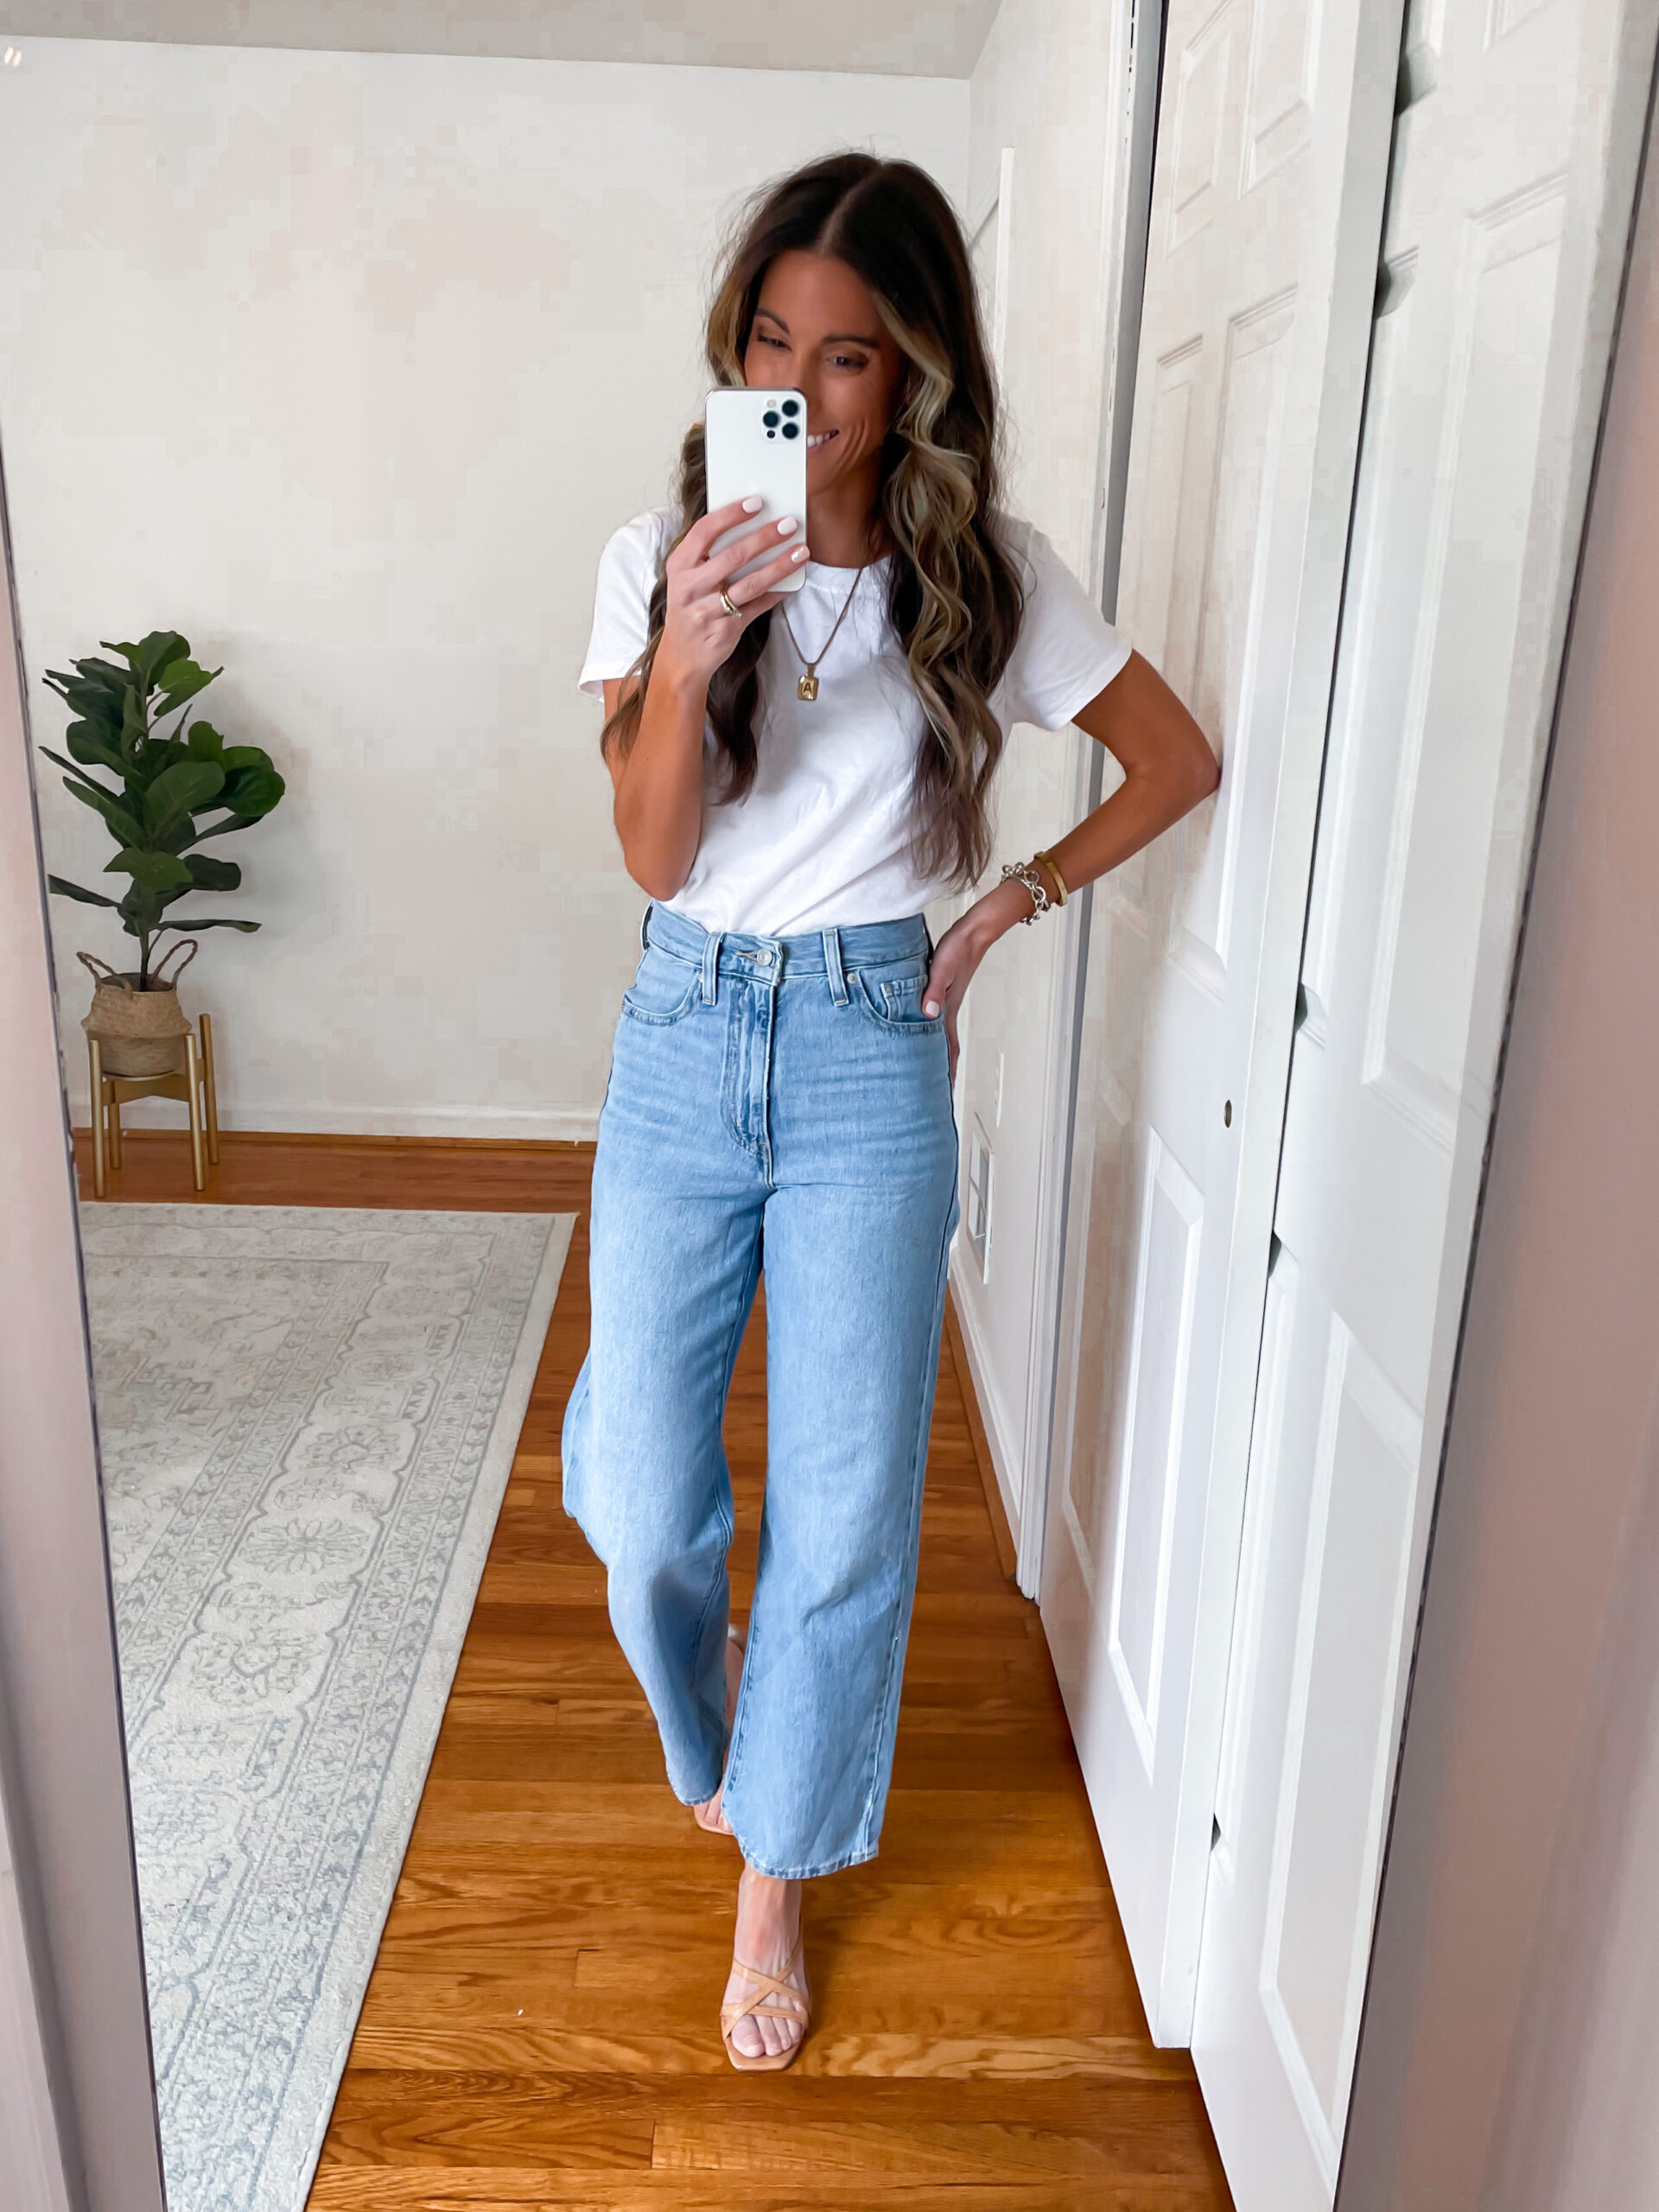 Levis Jeans Try On Haul - Sisters Guide to Style